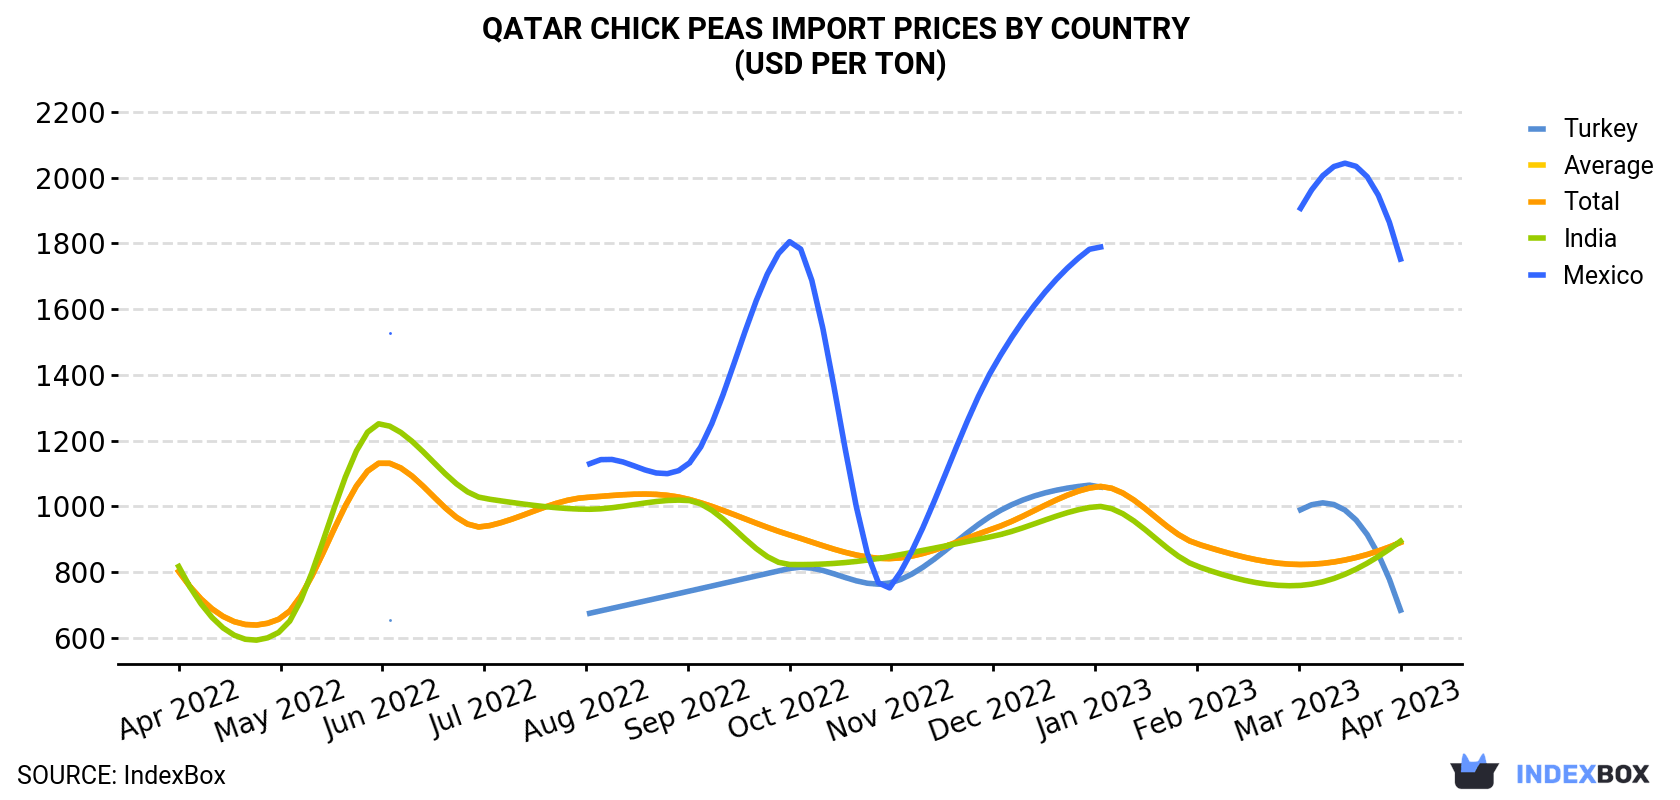 Qatar Chick Peas Import Prices By Country (USD Per Ton)